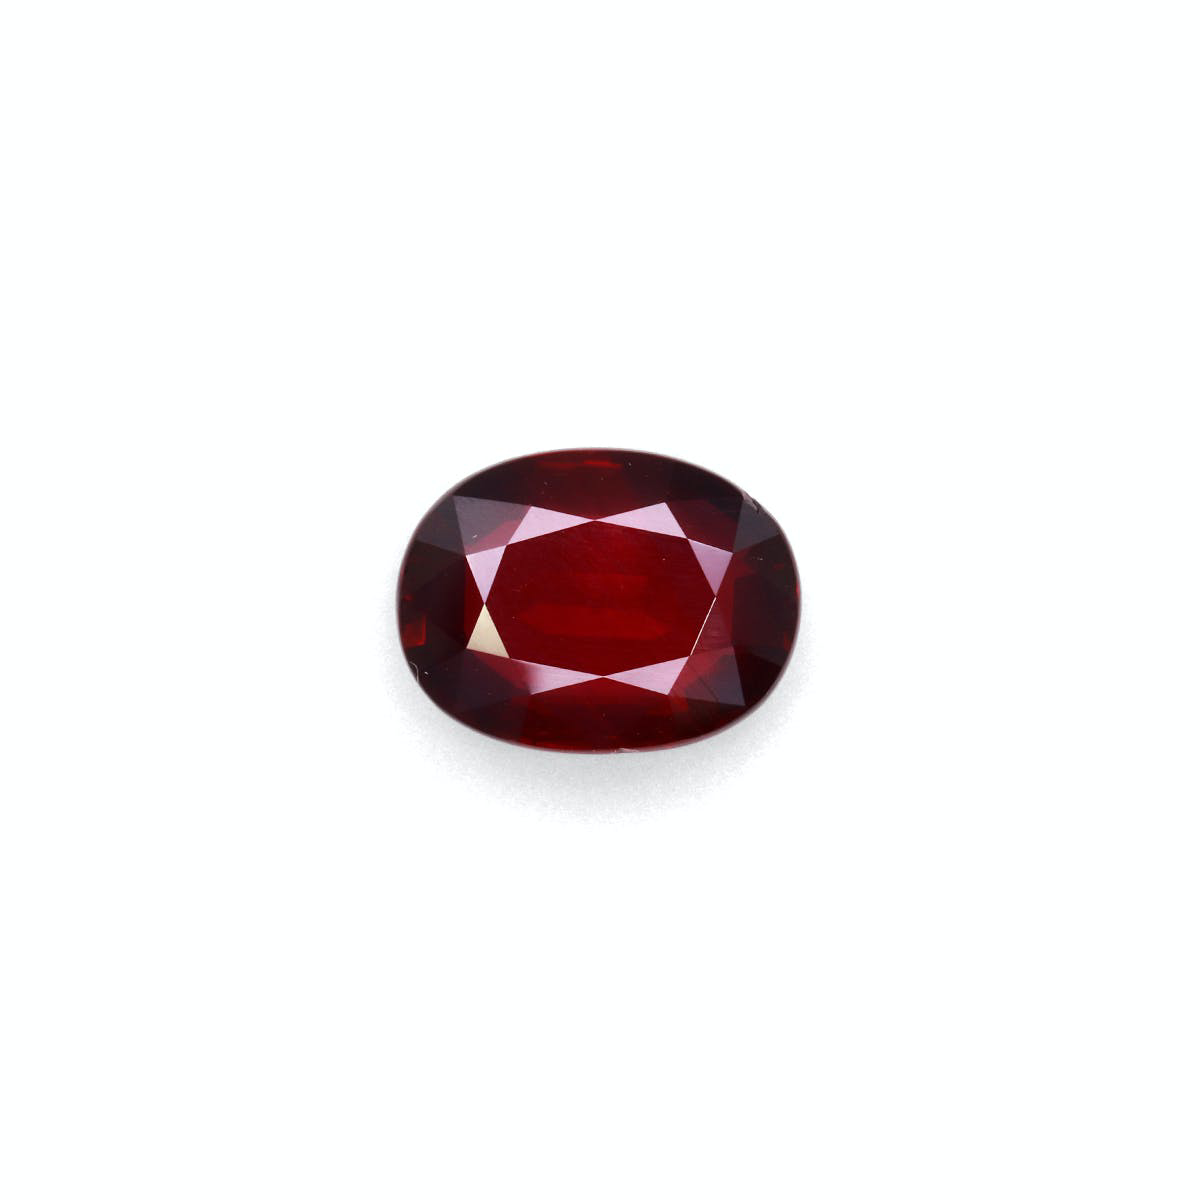 Picture of Pigeons Blood Heated Mozambique Ruby 5.01ct (J3-59)